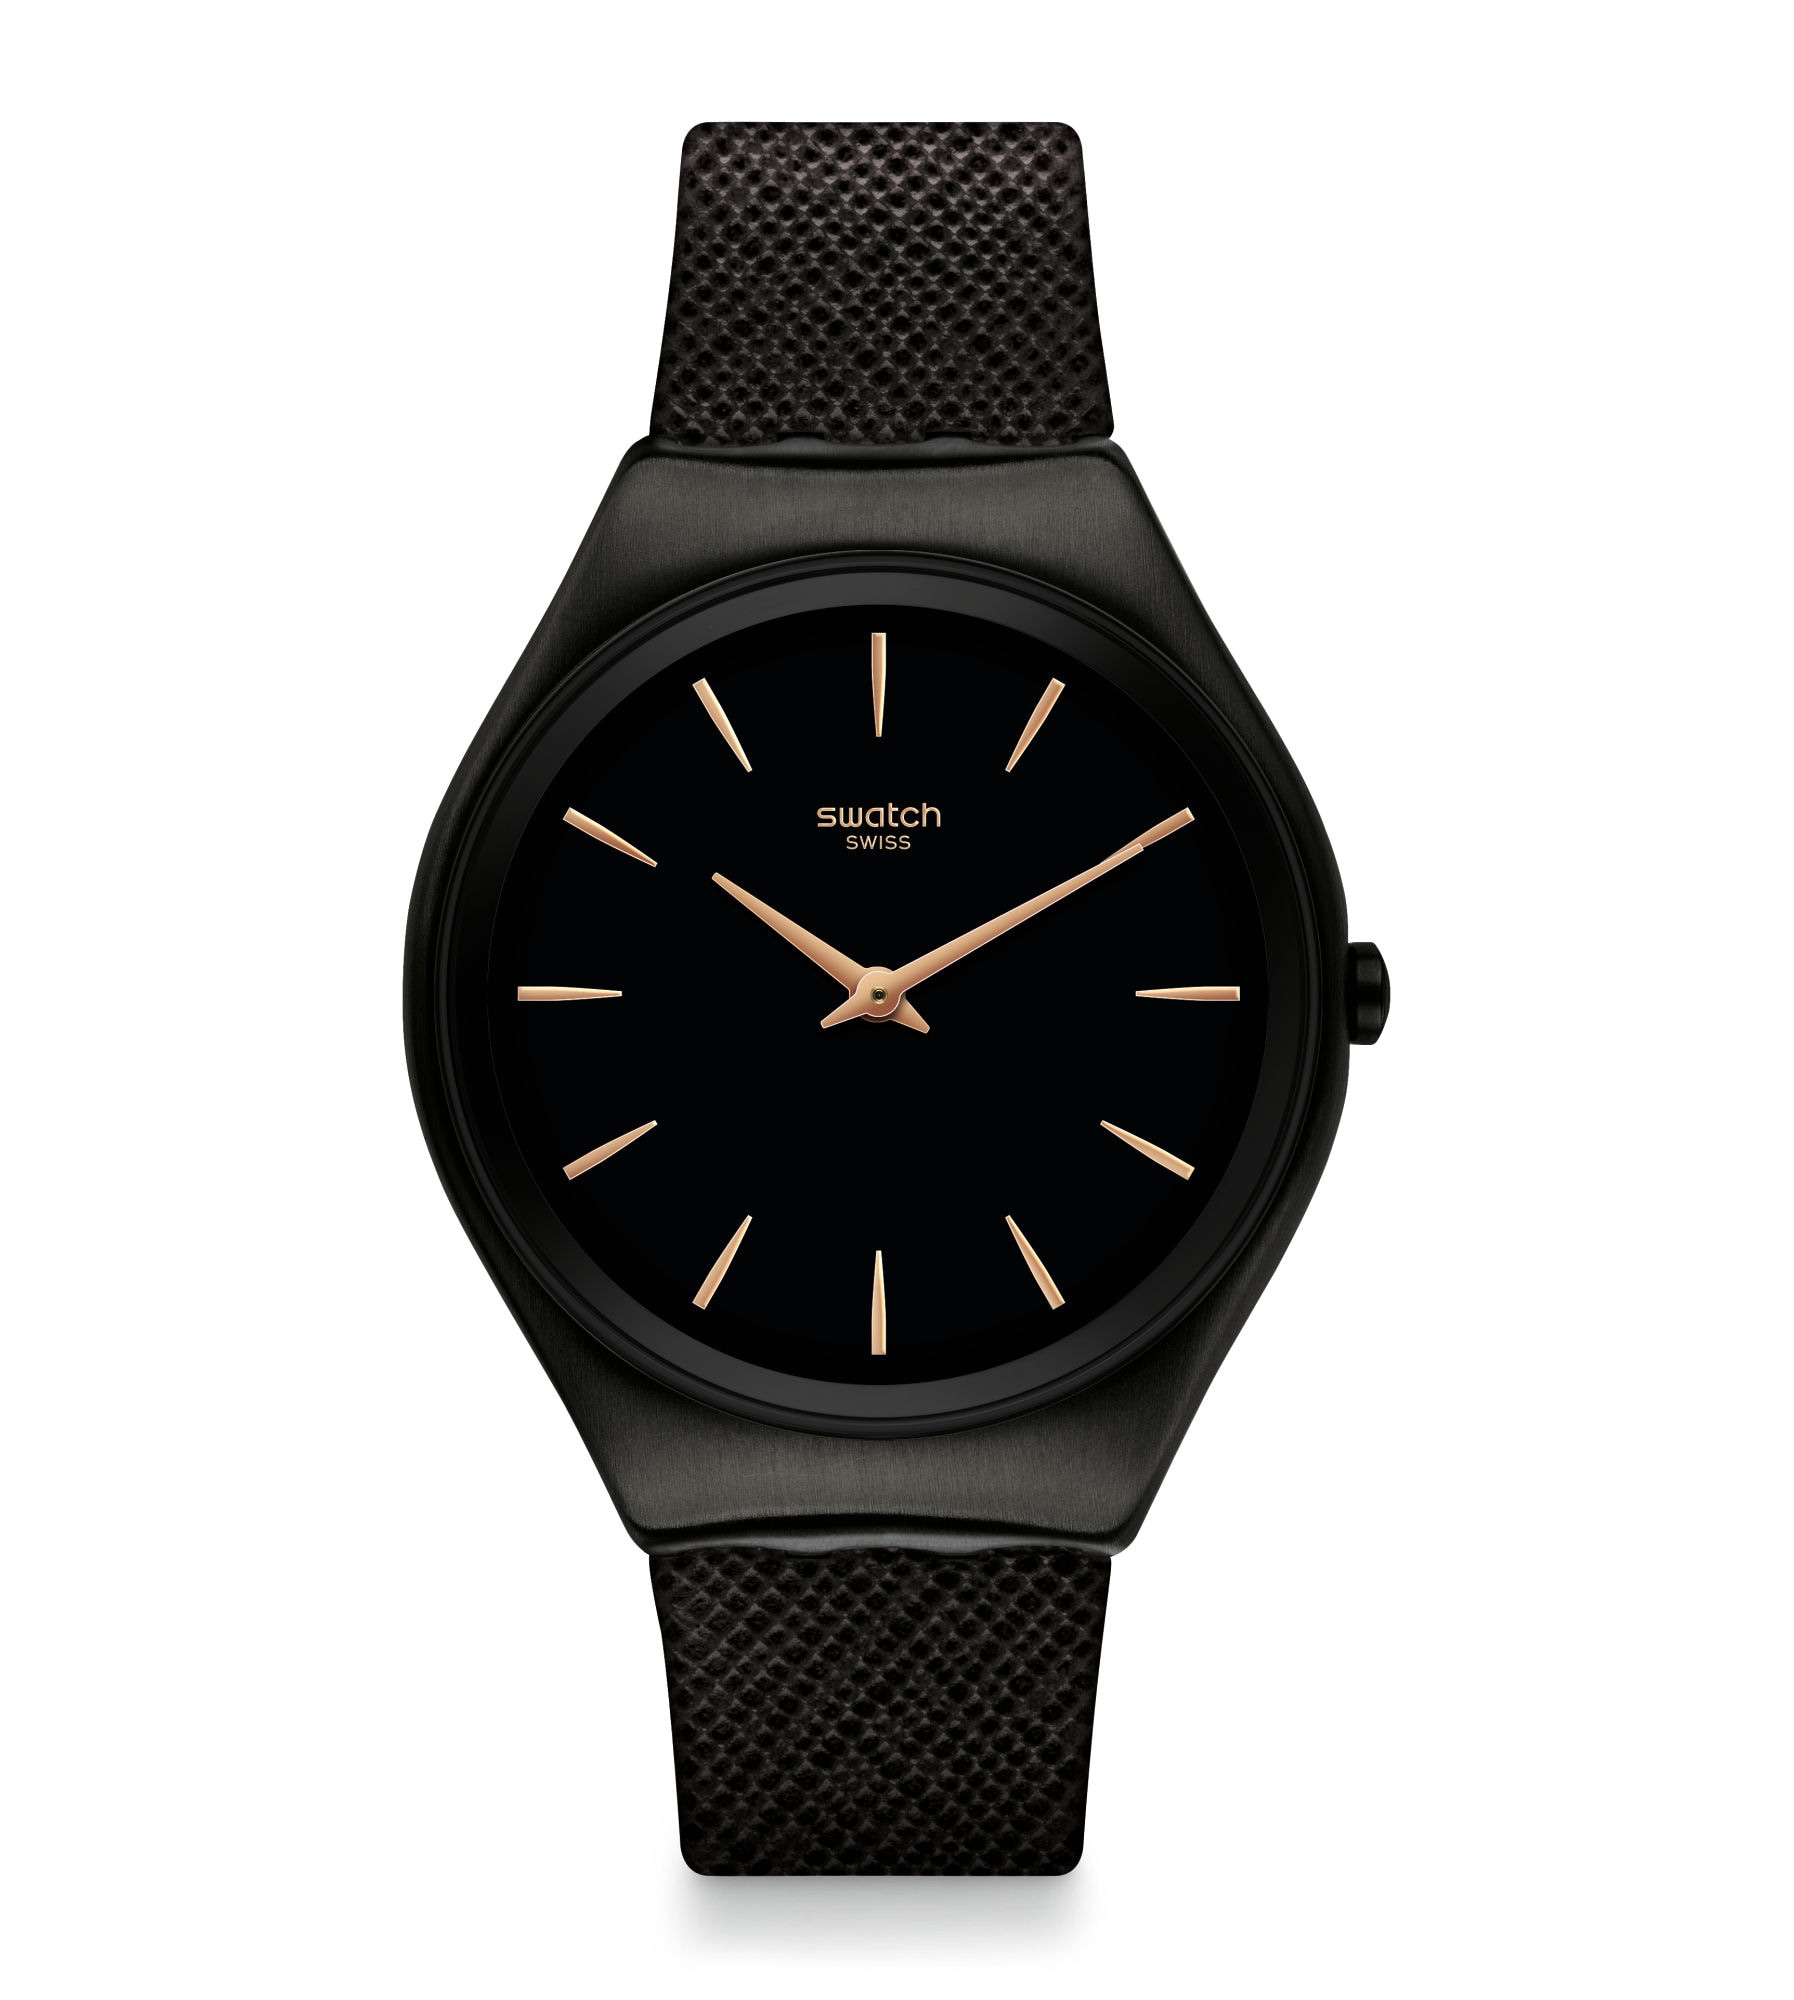 [question] Bauhaus inspired watch with black background? (Sorry for DW ...